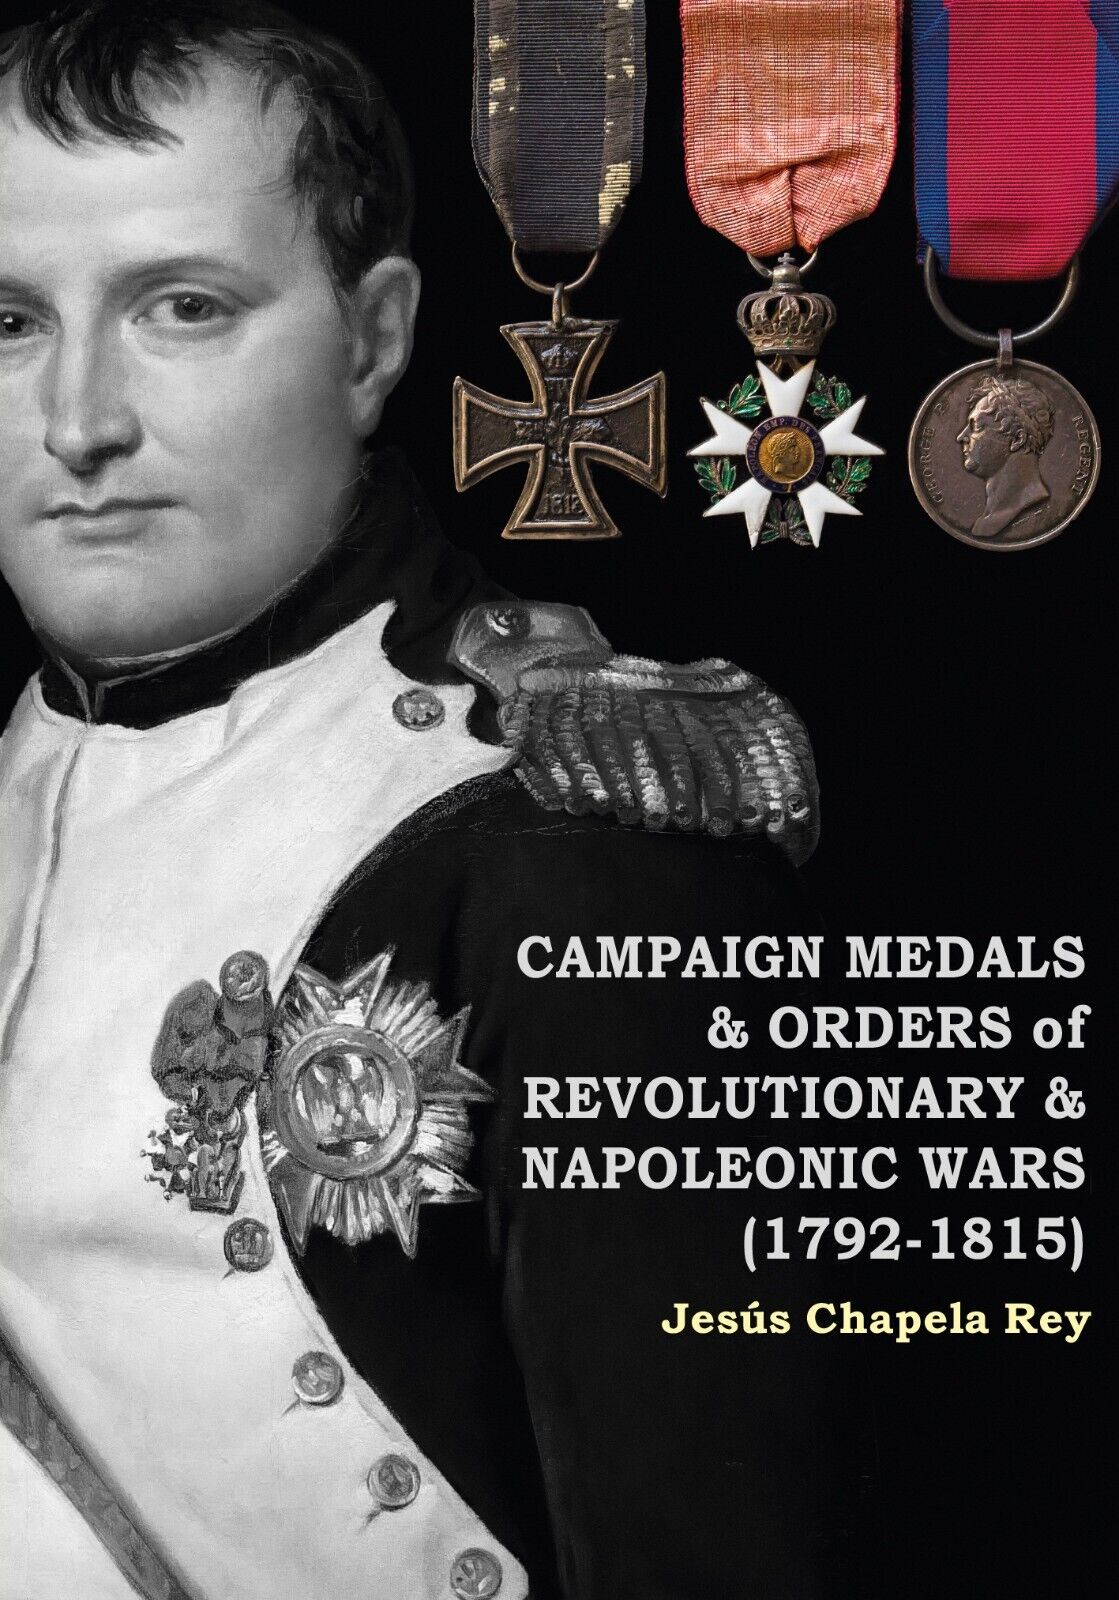 Book: Campaign medals & Orders of Revolutionary & Napoleonic wars (1792-1815)